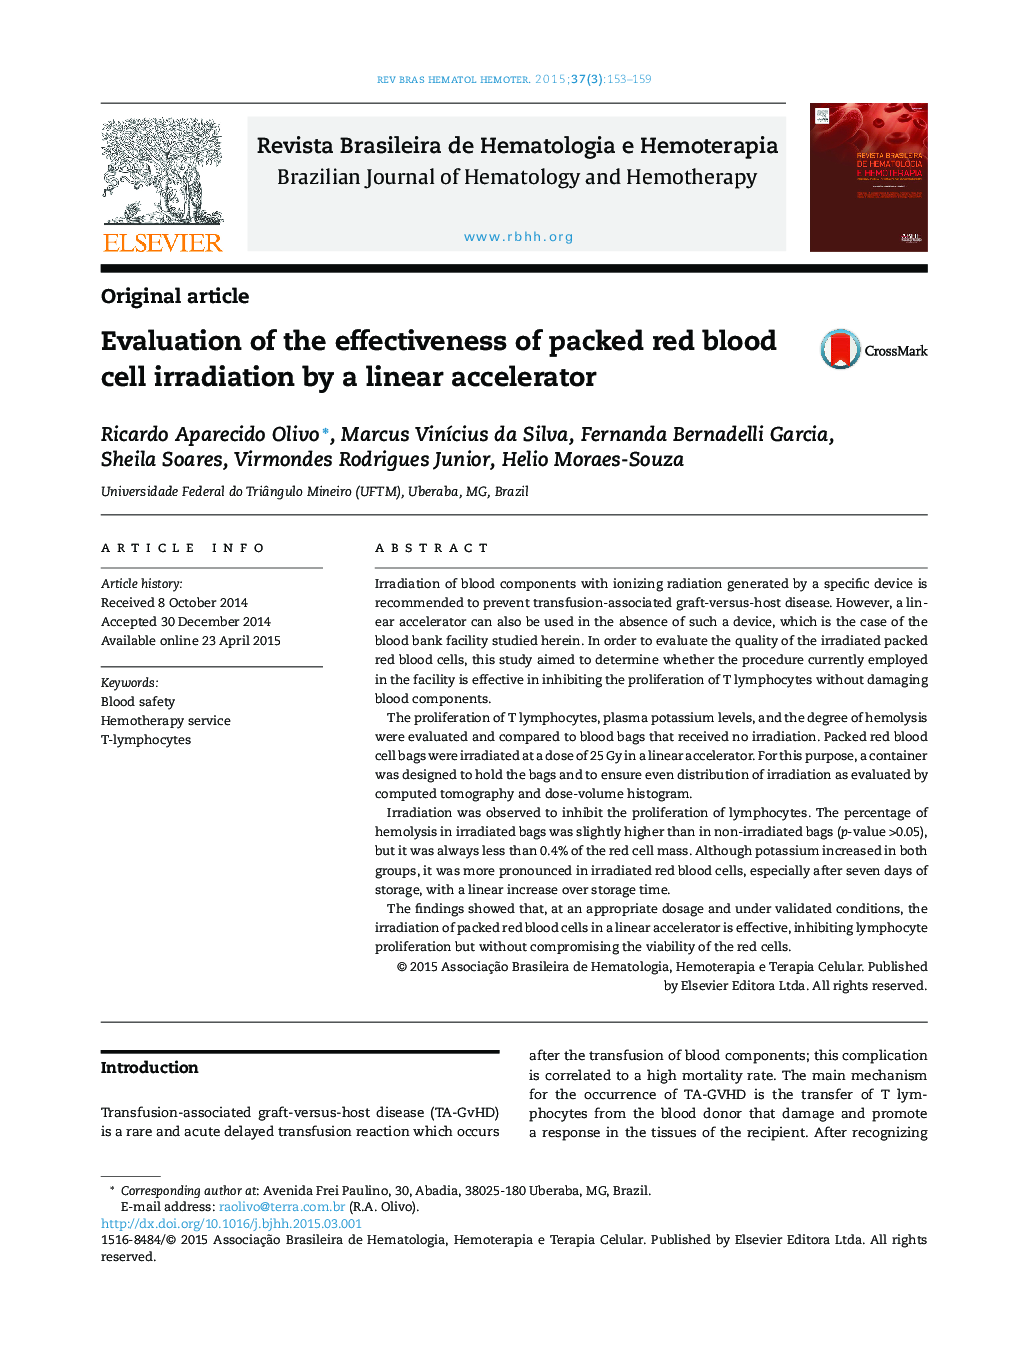 Evaluation of the effectiveness of packed red blood cell irradiation by a linear accelerator